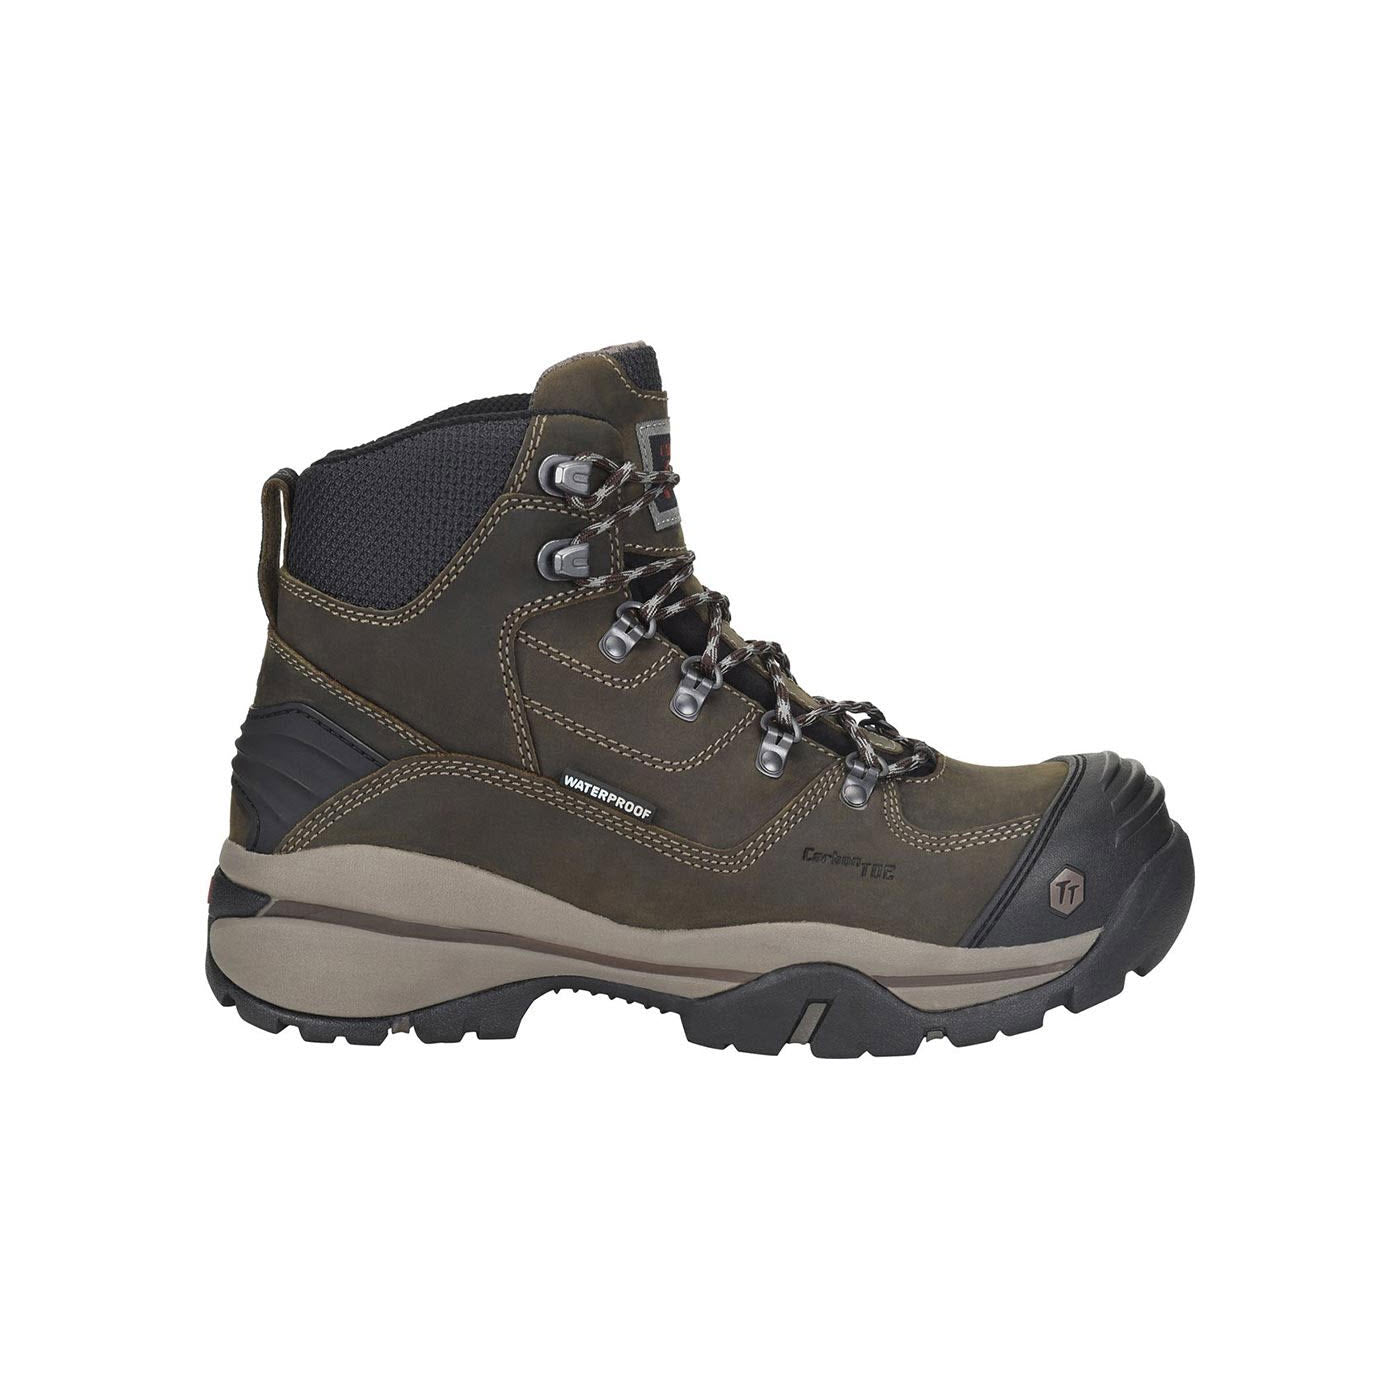 A single Carolina Composite Toe Flagstone 6 Inch Waterproof Hiker Gray work boot with metal eyelets and a sturdy rubber sole, isolated on a white background.